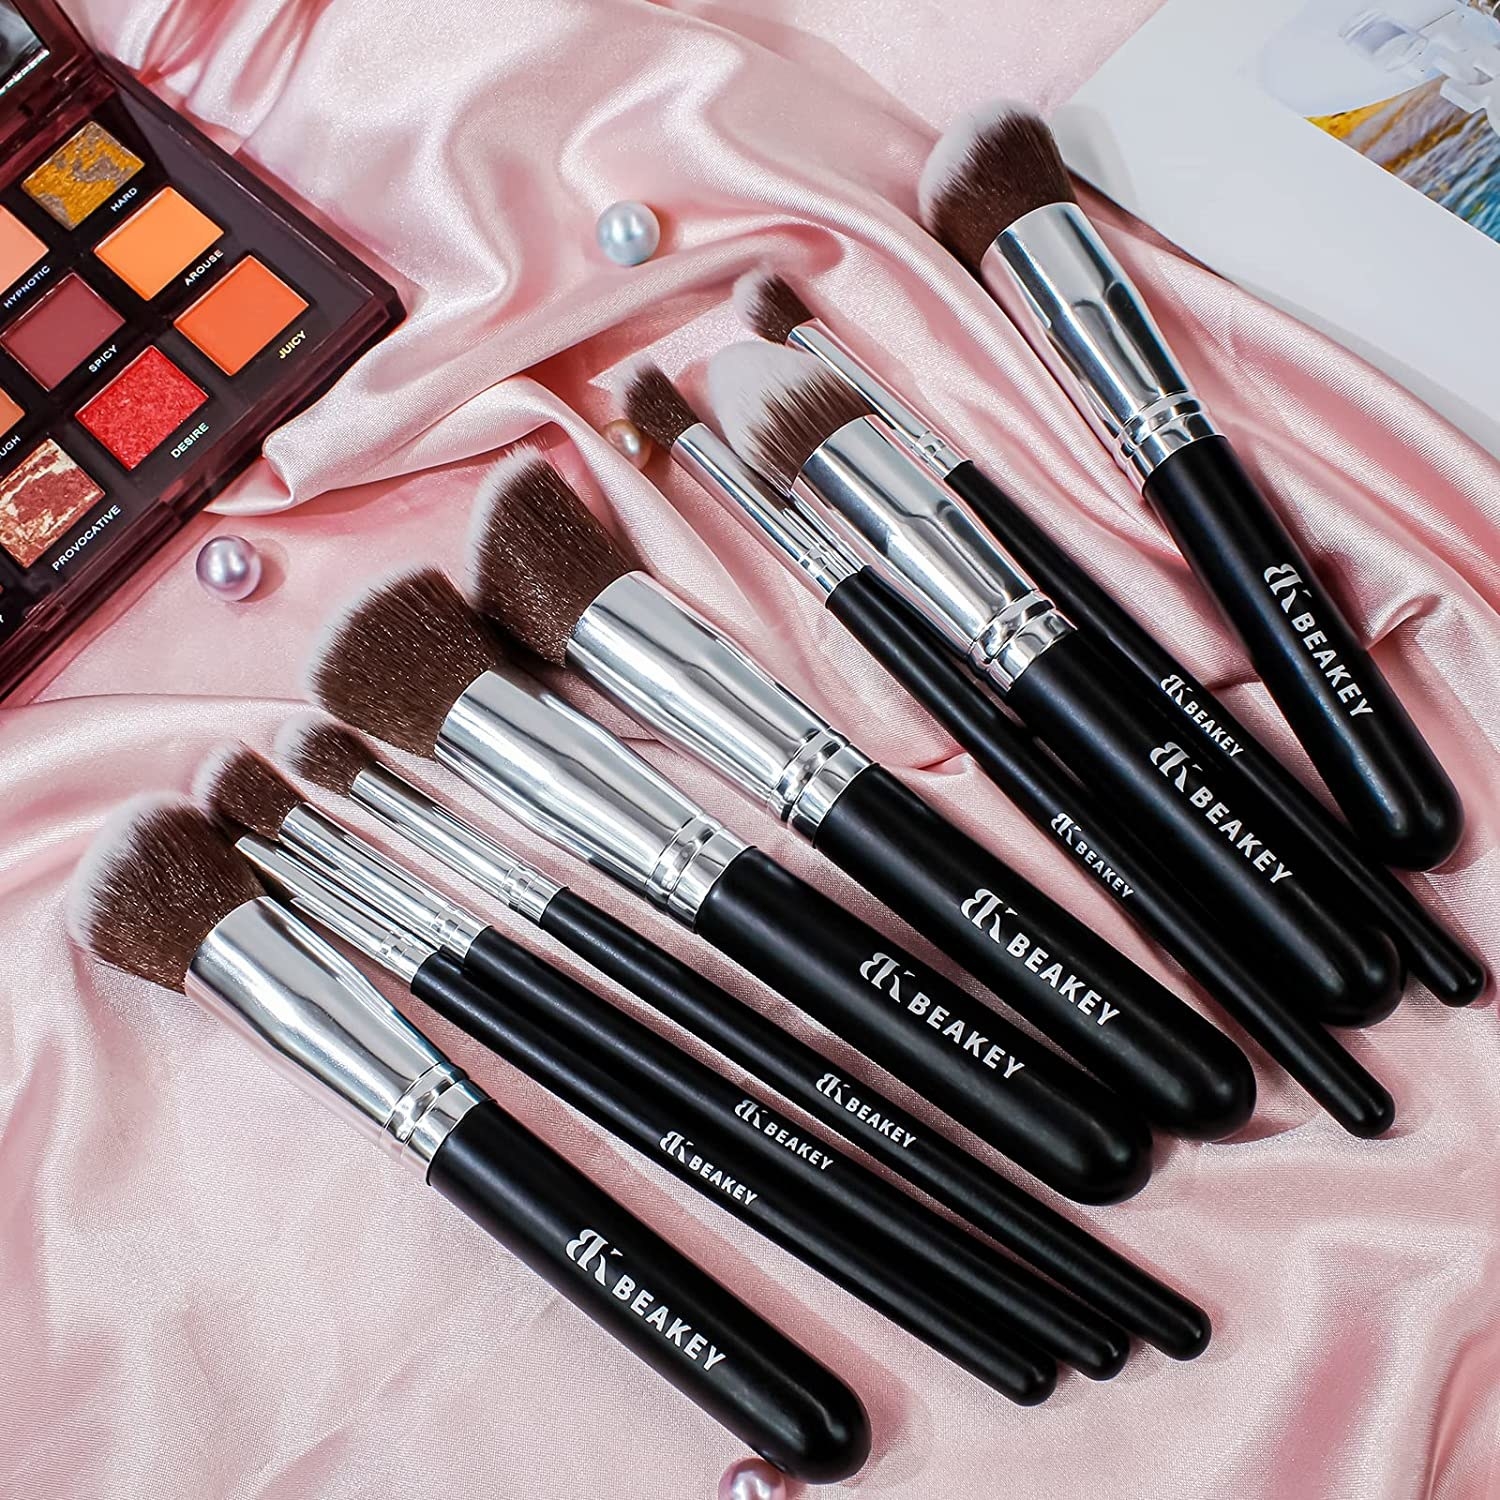 The brushes on a satiny surface next to an eyeshadow palette and some loose pearls